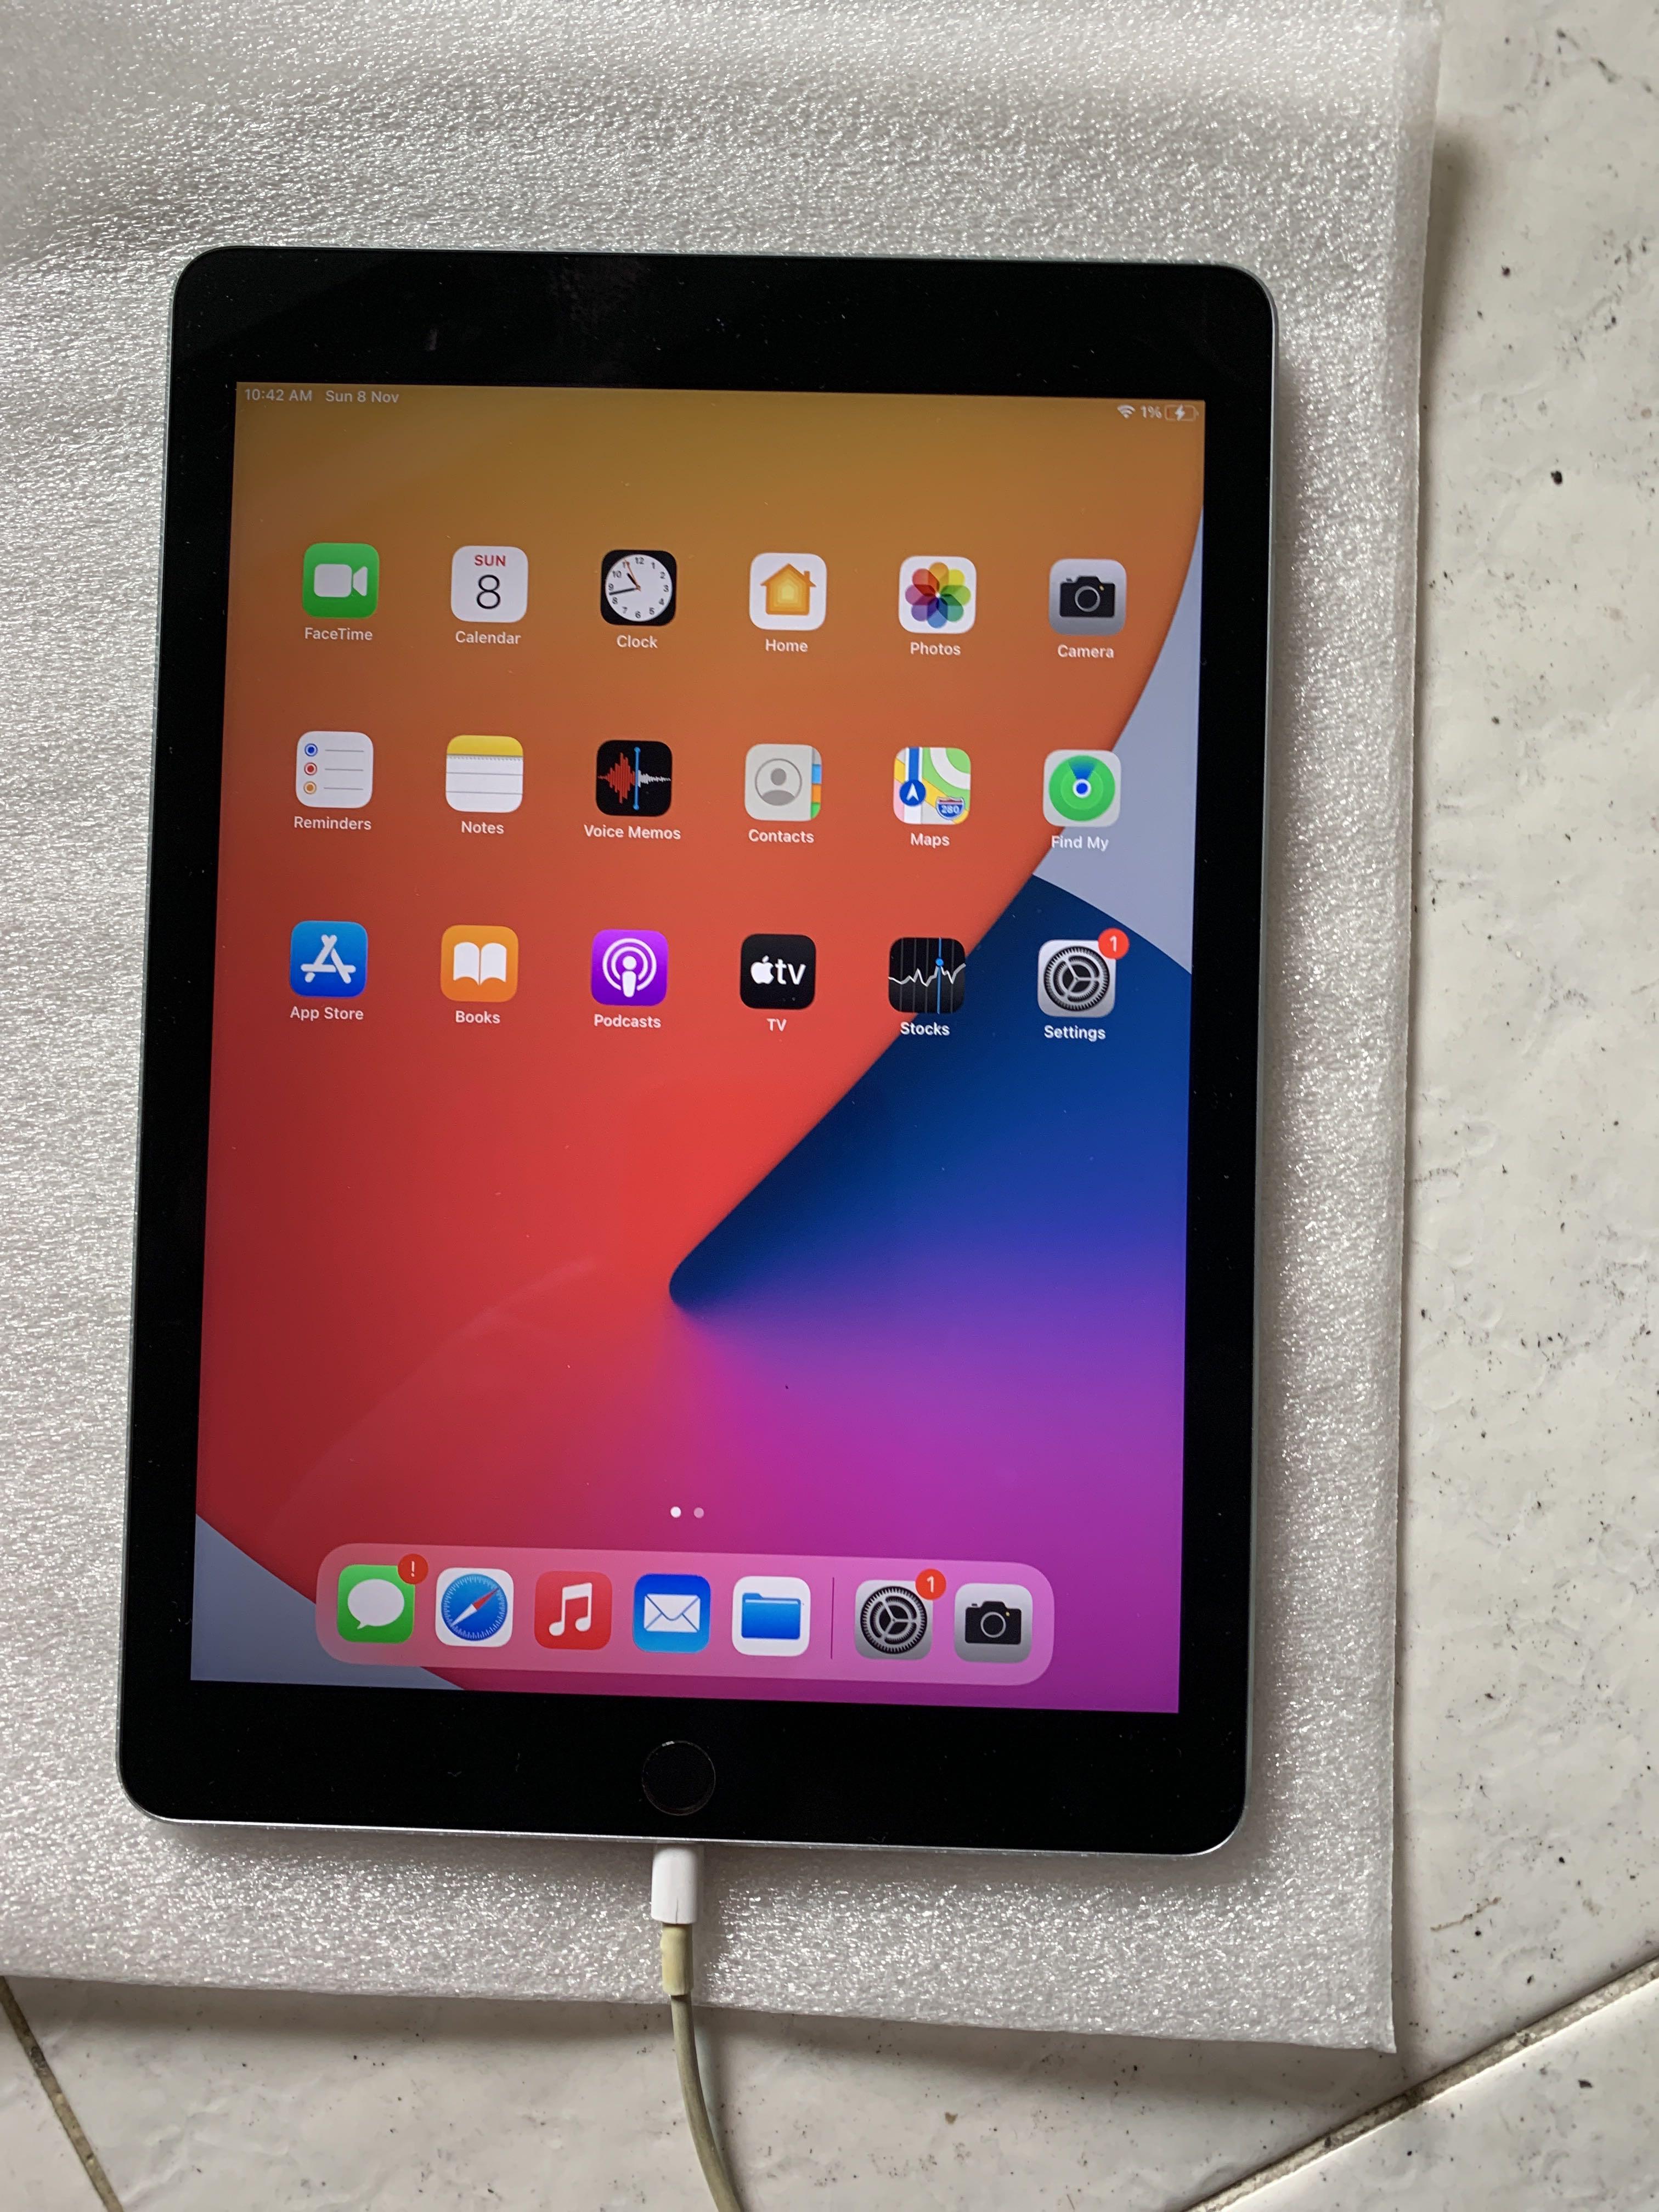 Apple Ipad Air 2 Wifi 64gb Mobile Phones Tablets Tablets On Carousell